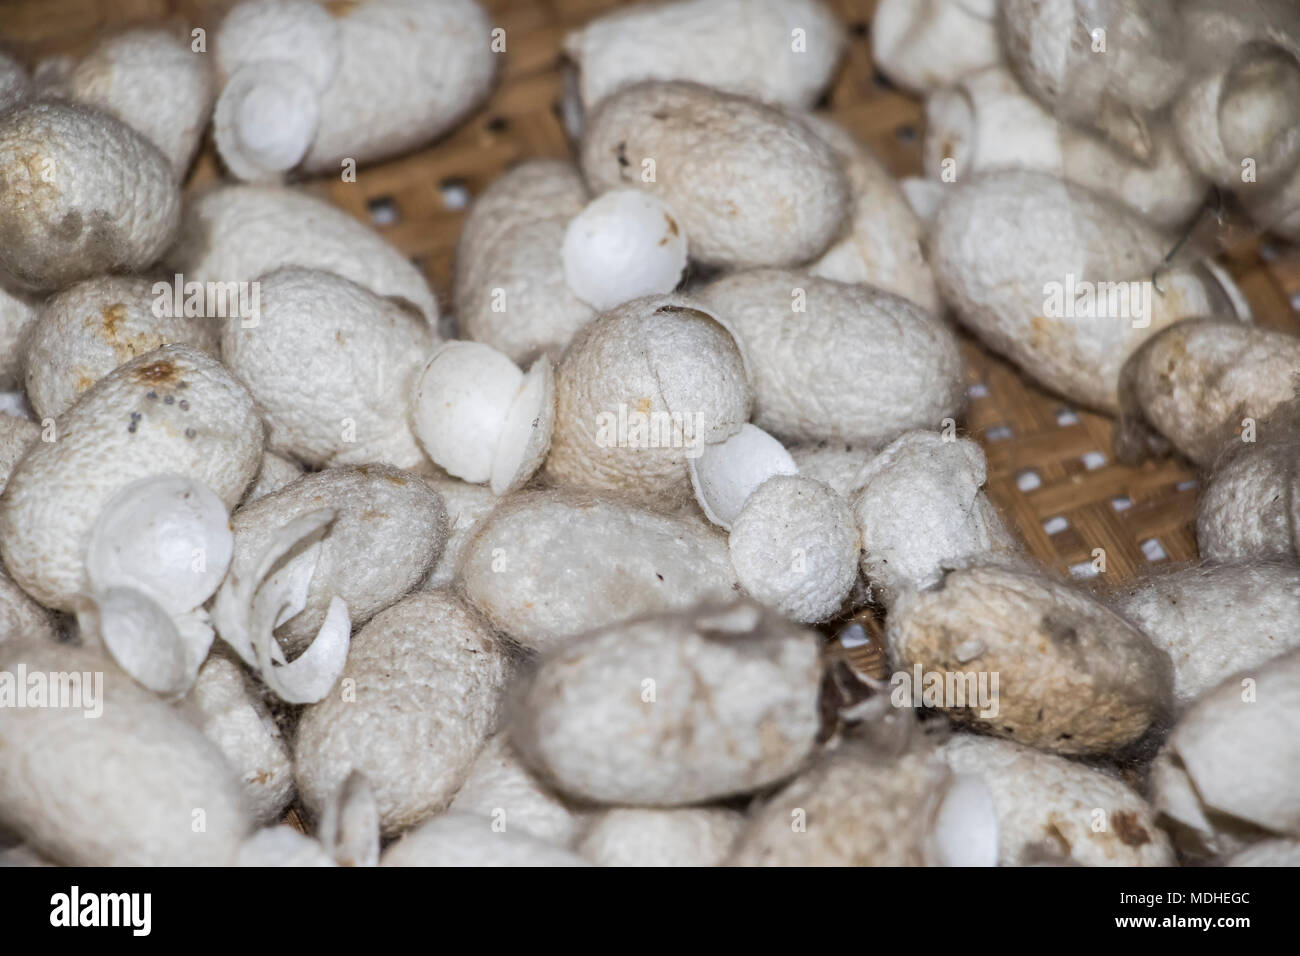 Cocoons of the larvae of the mulberry silkworm at the Mulberry Silk Farm, Ban Li; Xiangkhouang, Laos Stock Photo